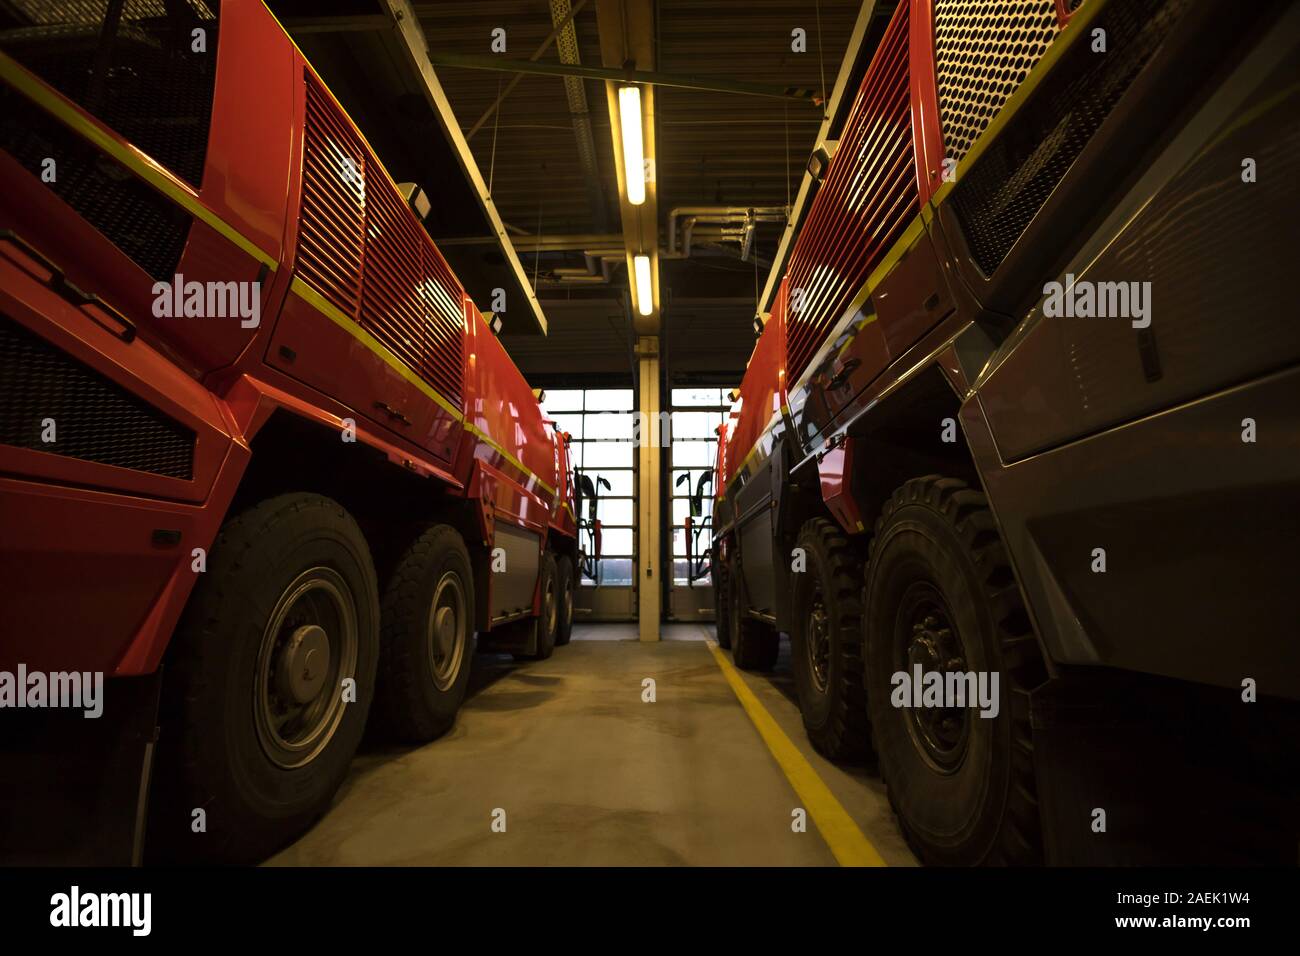 modern airport fire department fire engines Stock Photo